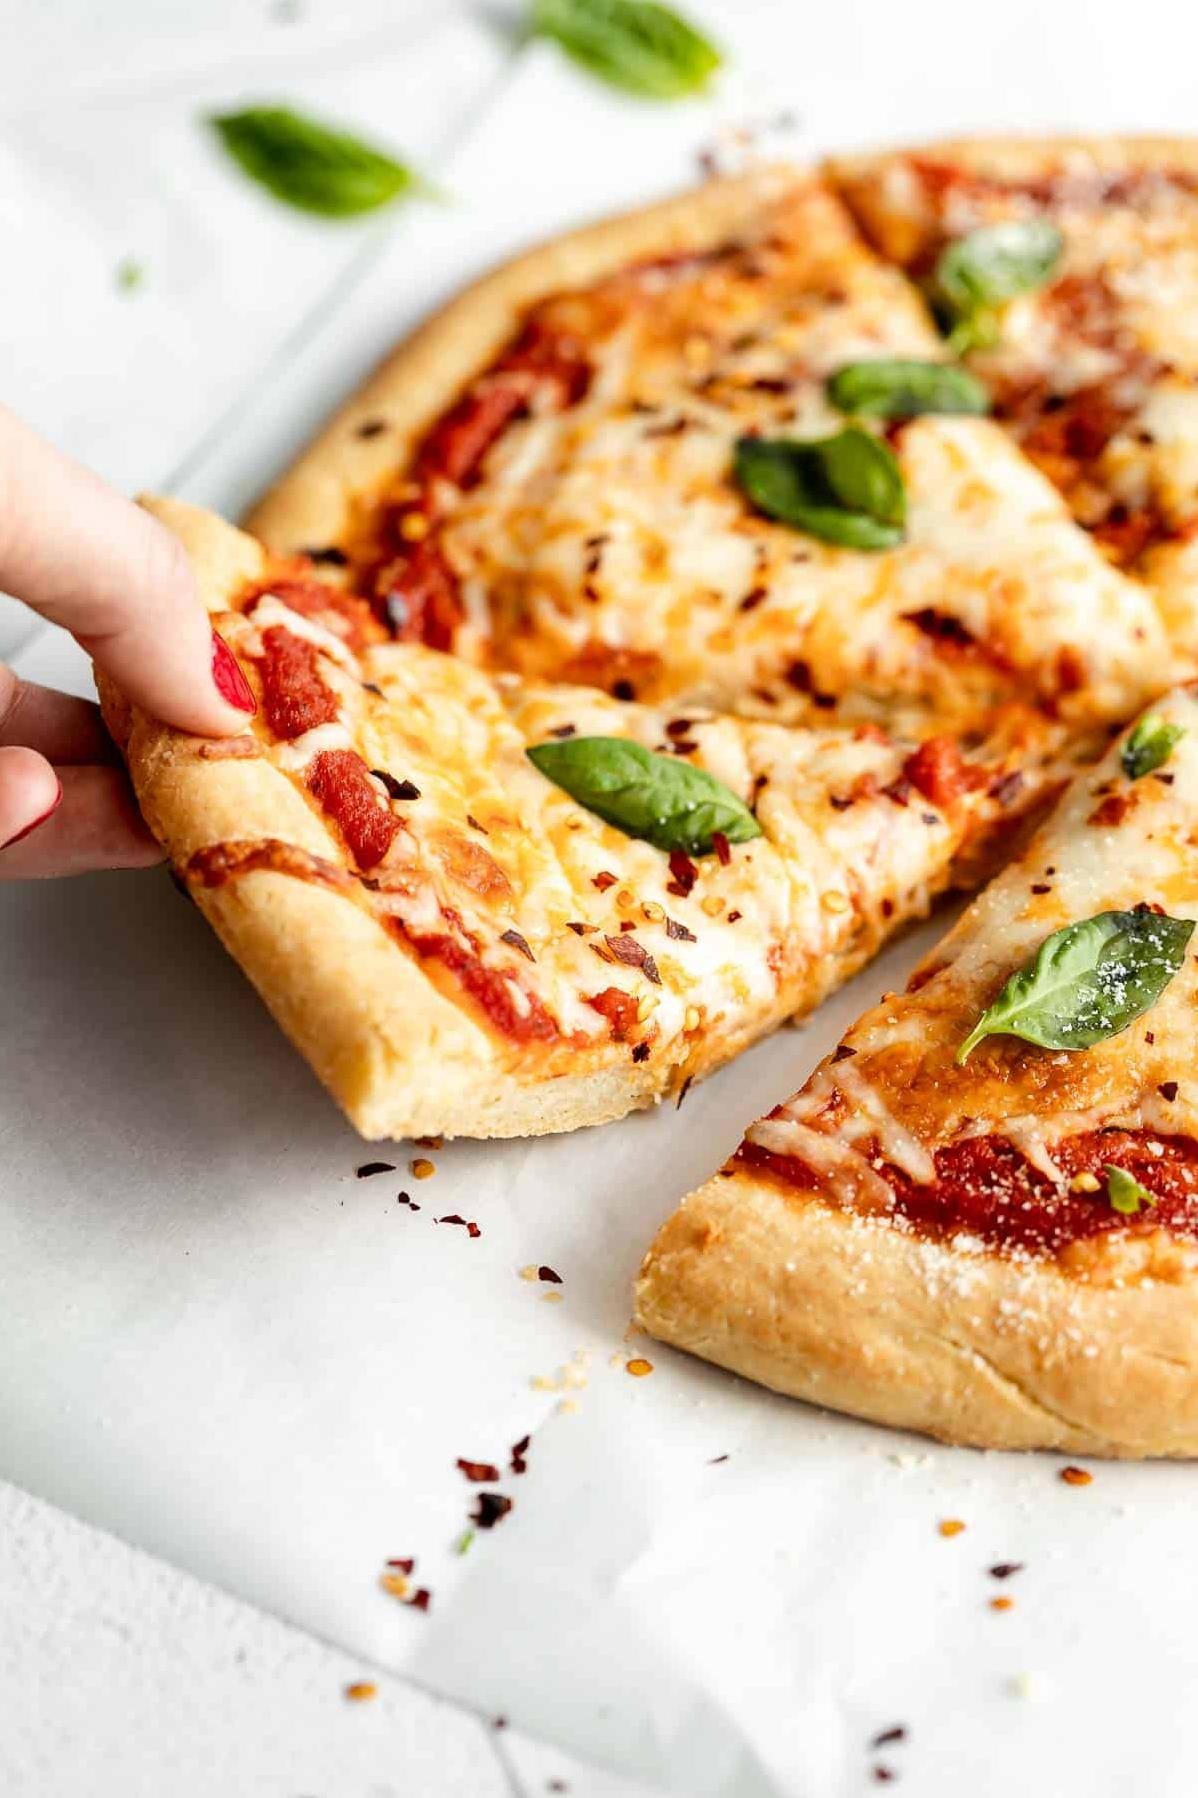  Gluten-free pizza is now possible with this easy recipe!